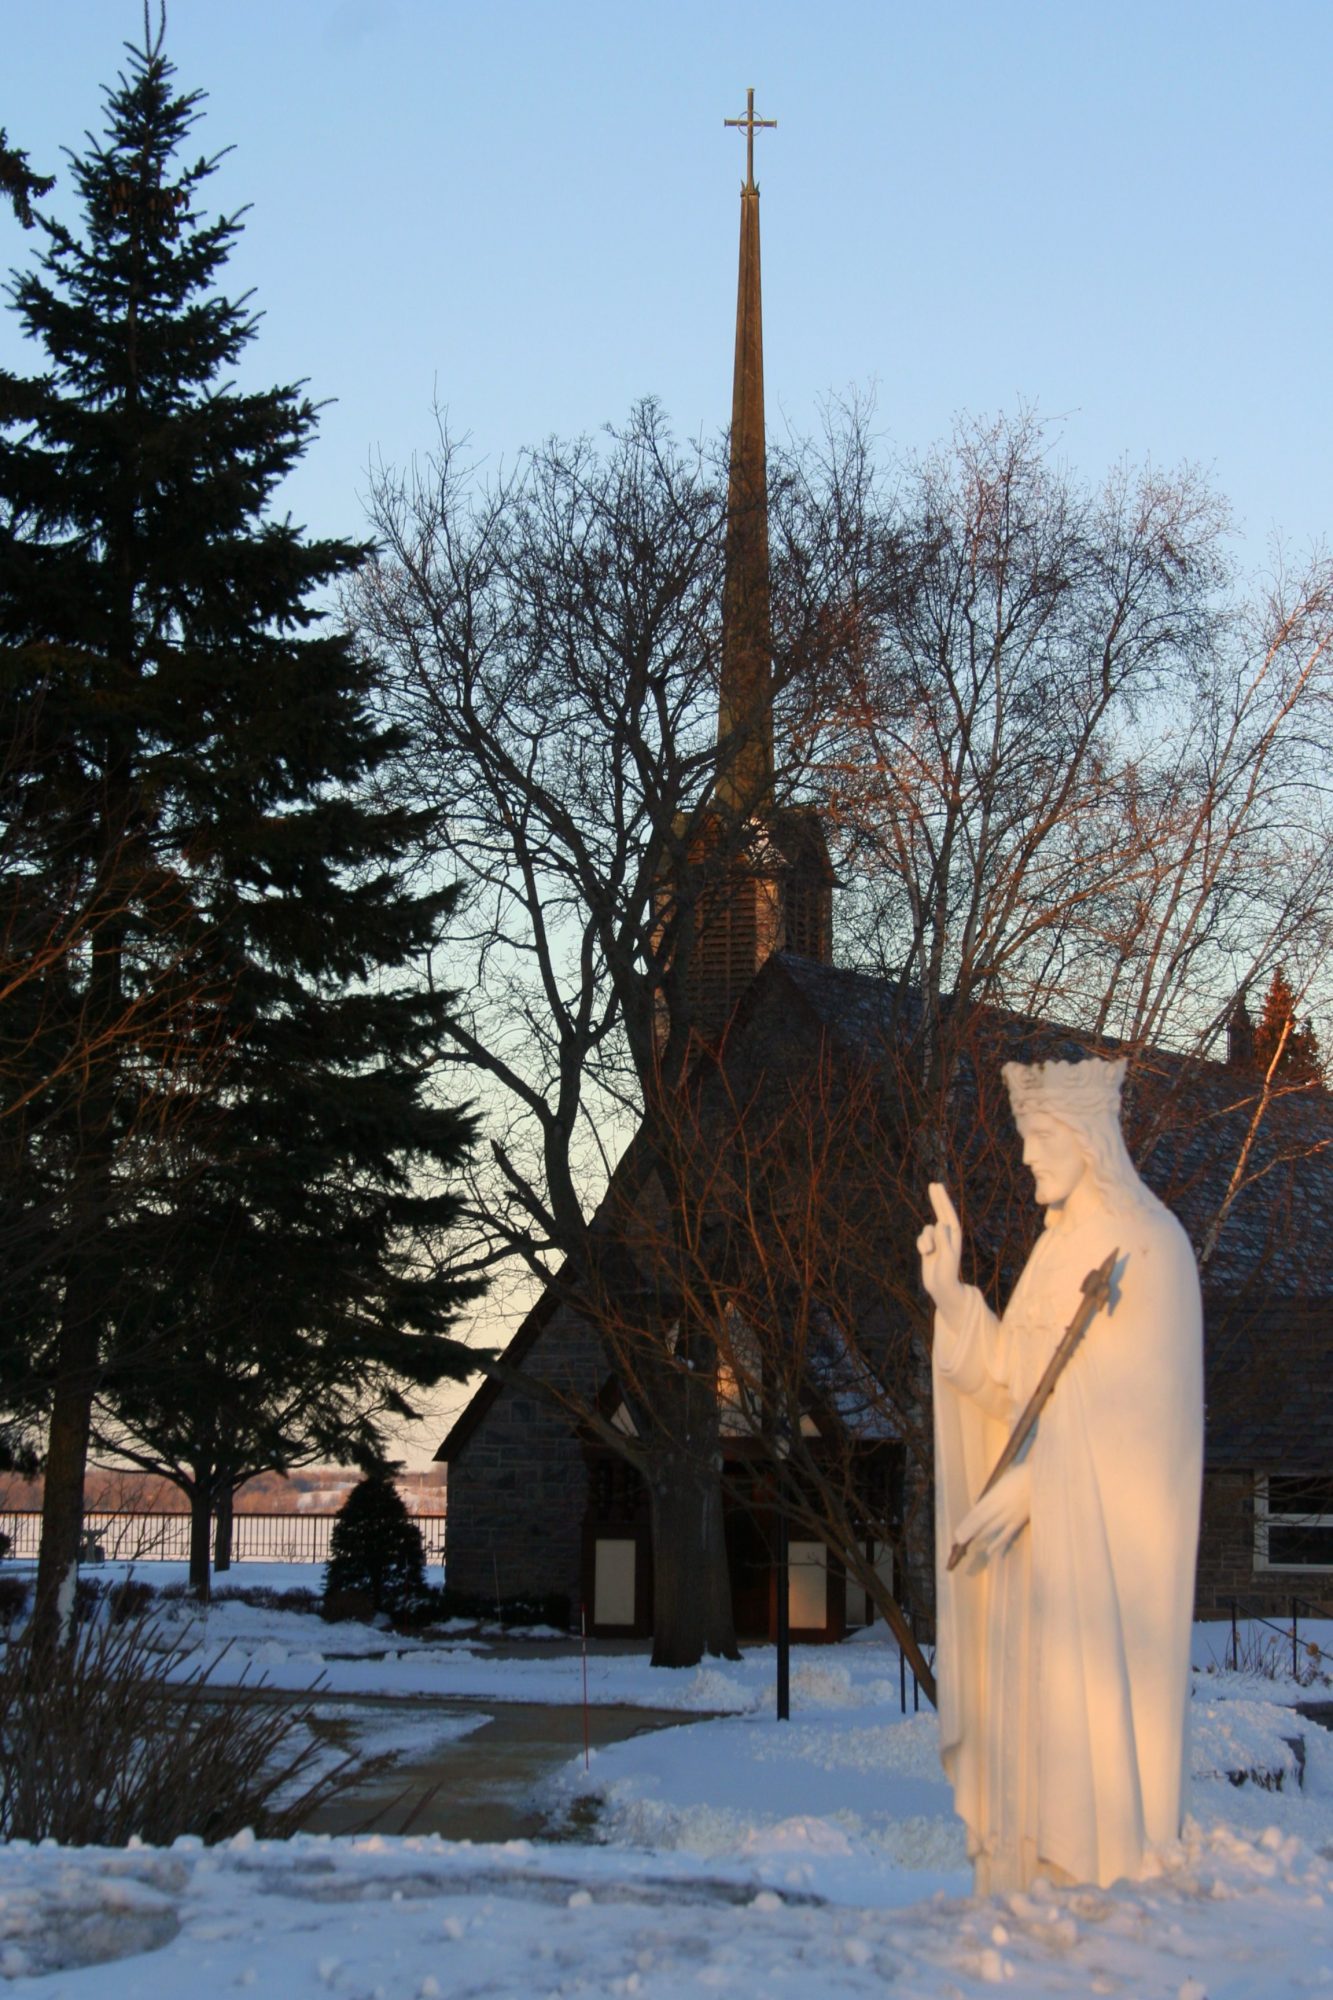 A statue in the snow in front of a church at the lake